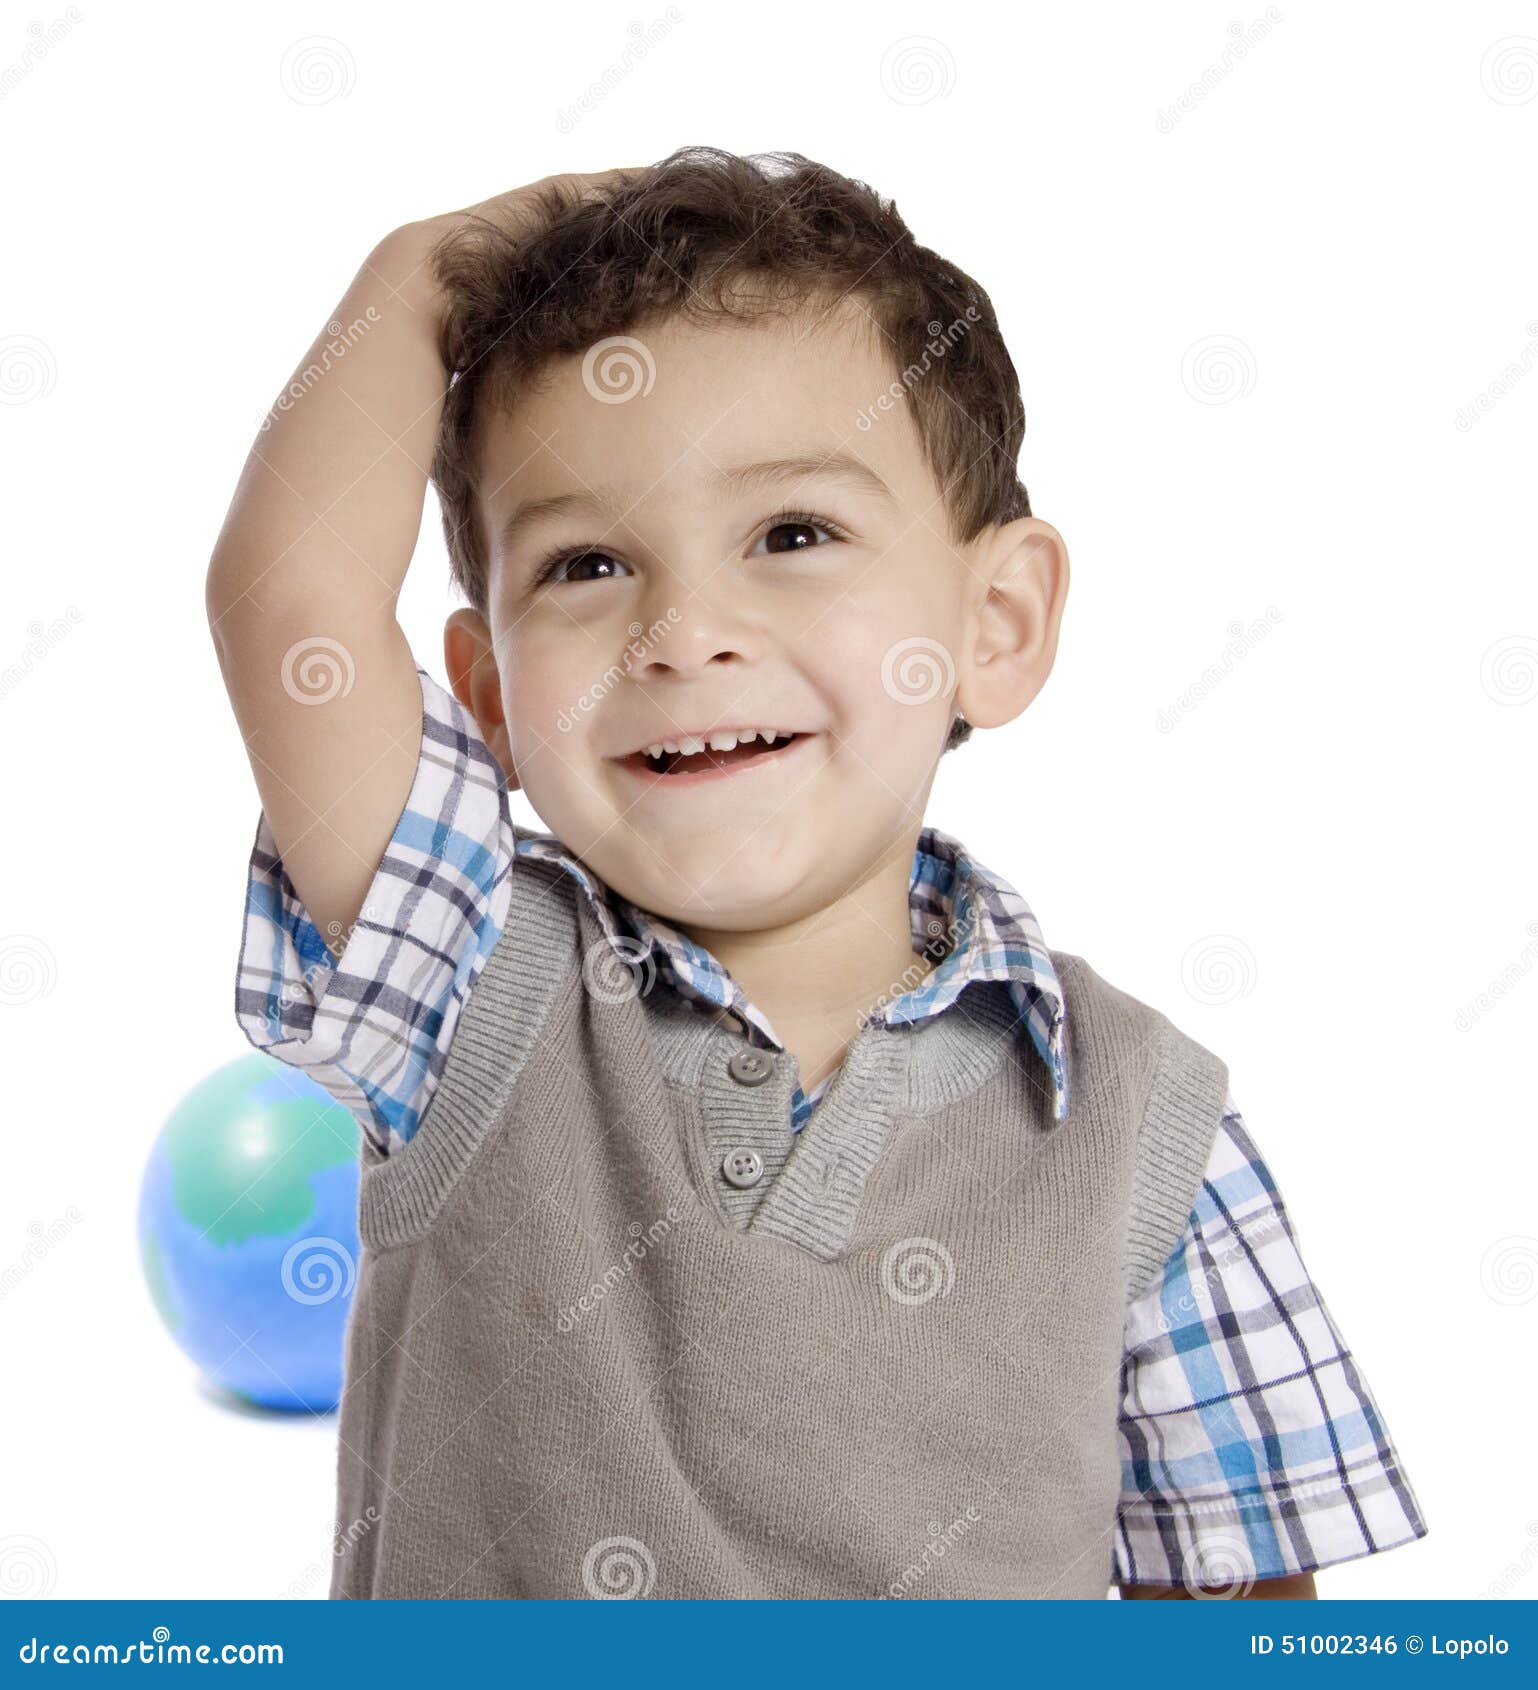 A Little boy earth stock photo. Image of white, earth - 51002346